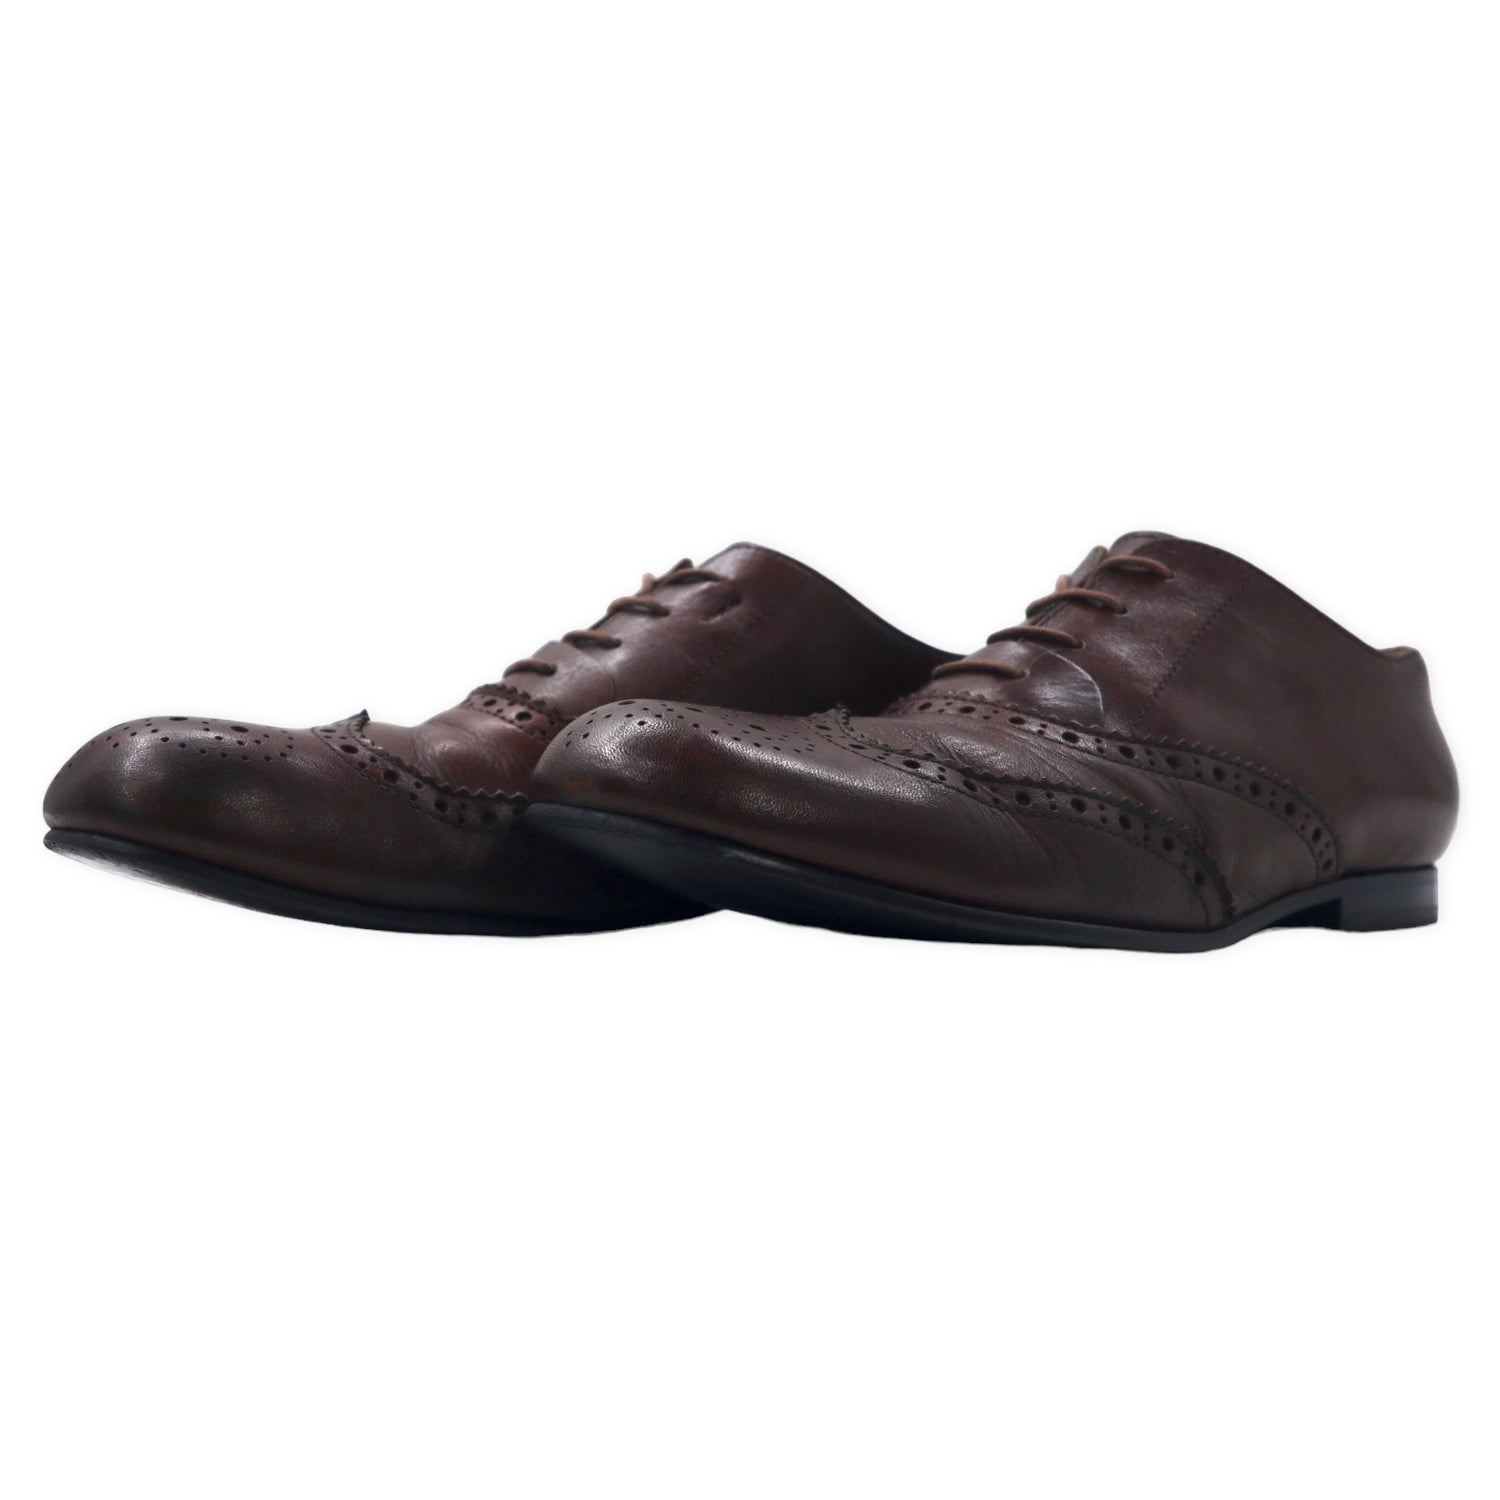 TRICOT COMME des GARCONS WING TIP Dress Shoes US7 Brown Leather 